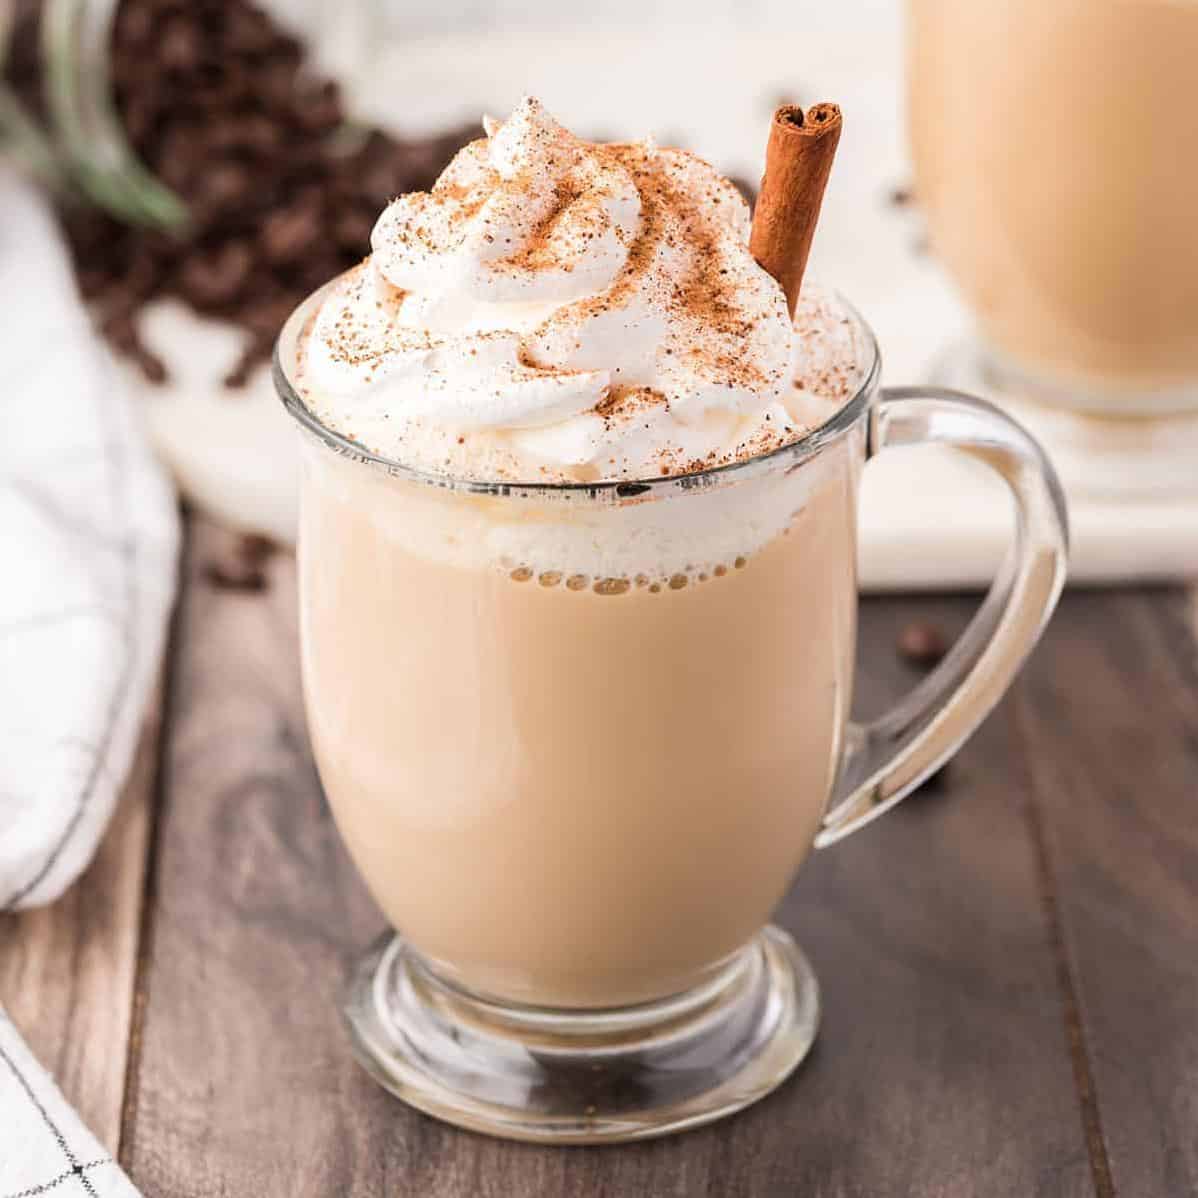  Frothy milk and warm spices - what could be better?